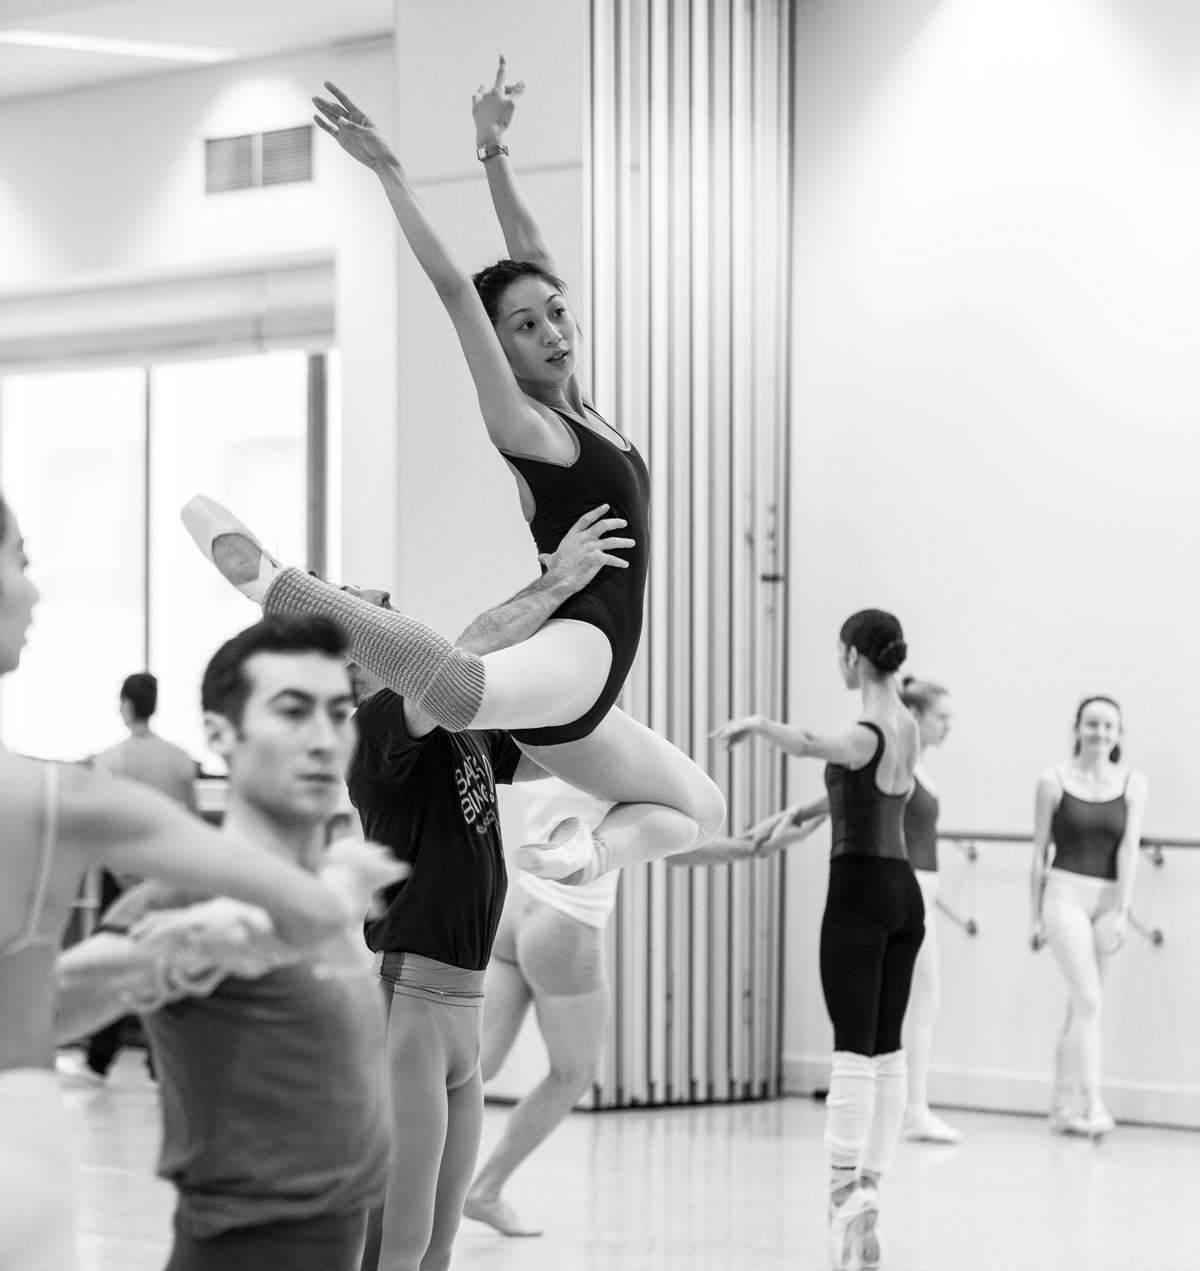 A day in the life of a Ballet Dancer with Natasha Kusen